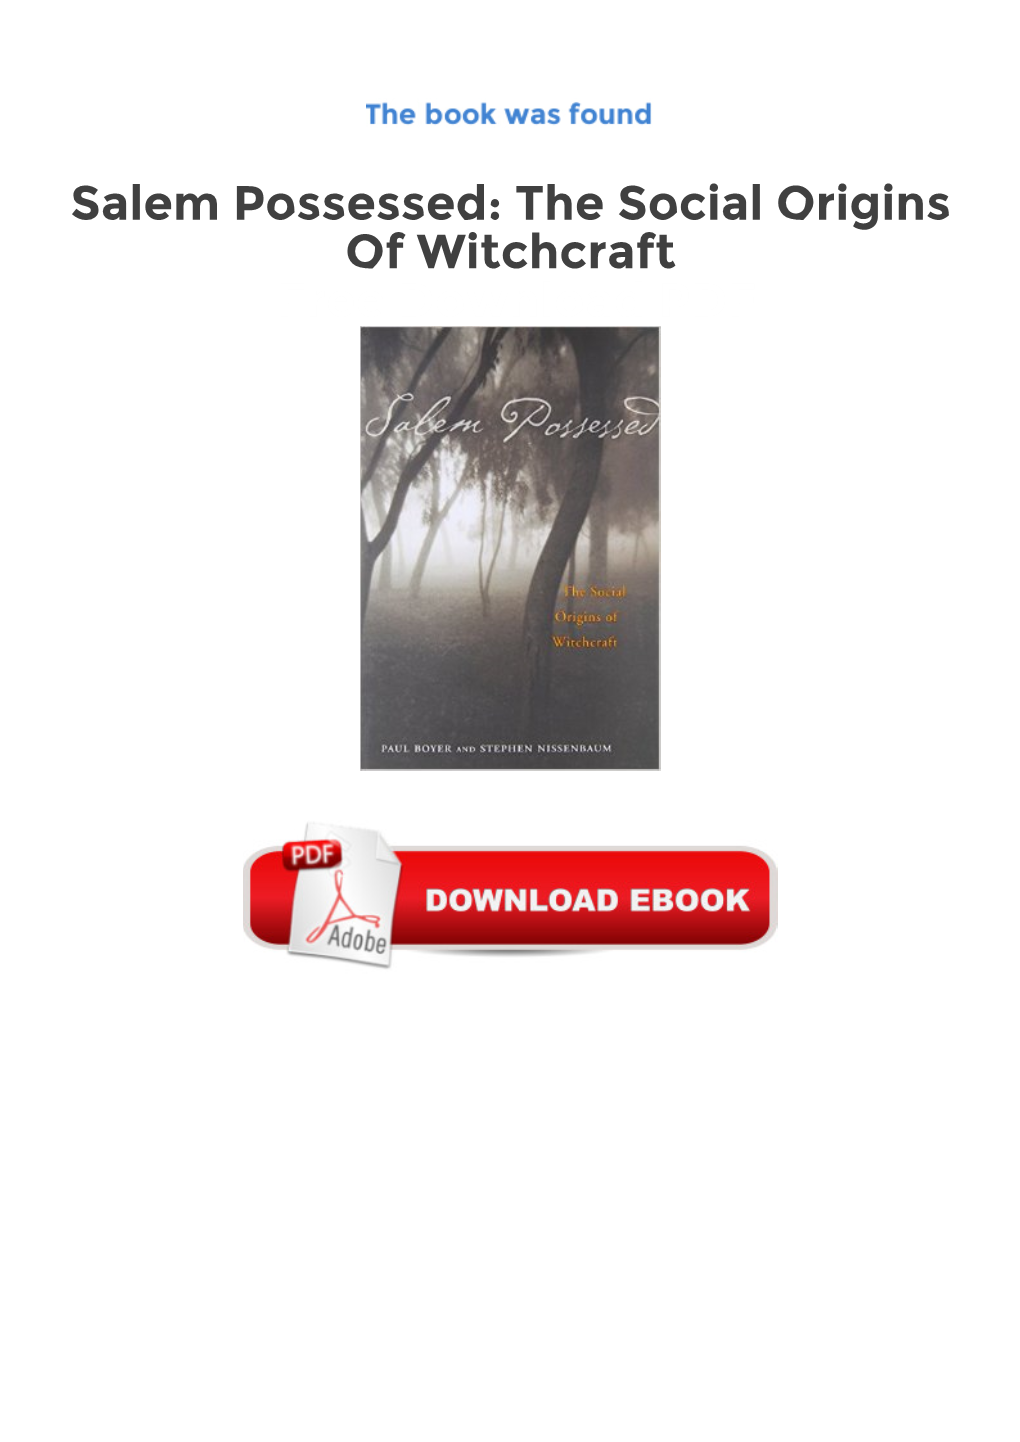 Salem Possessed: the Social Origins of Witchcraft Free Download